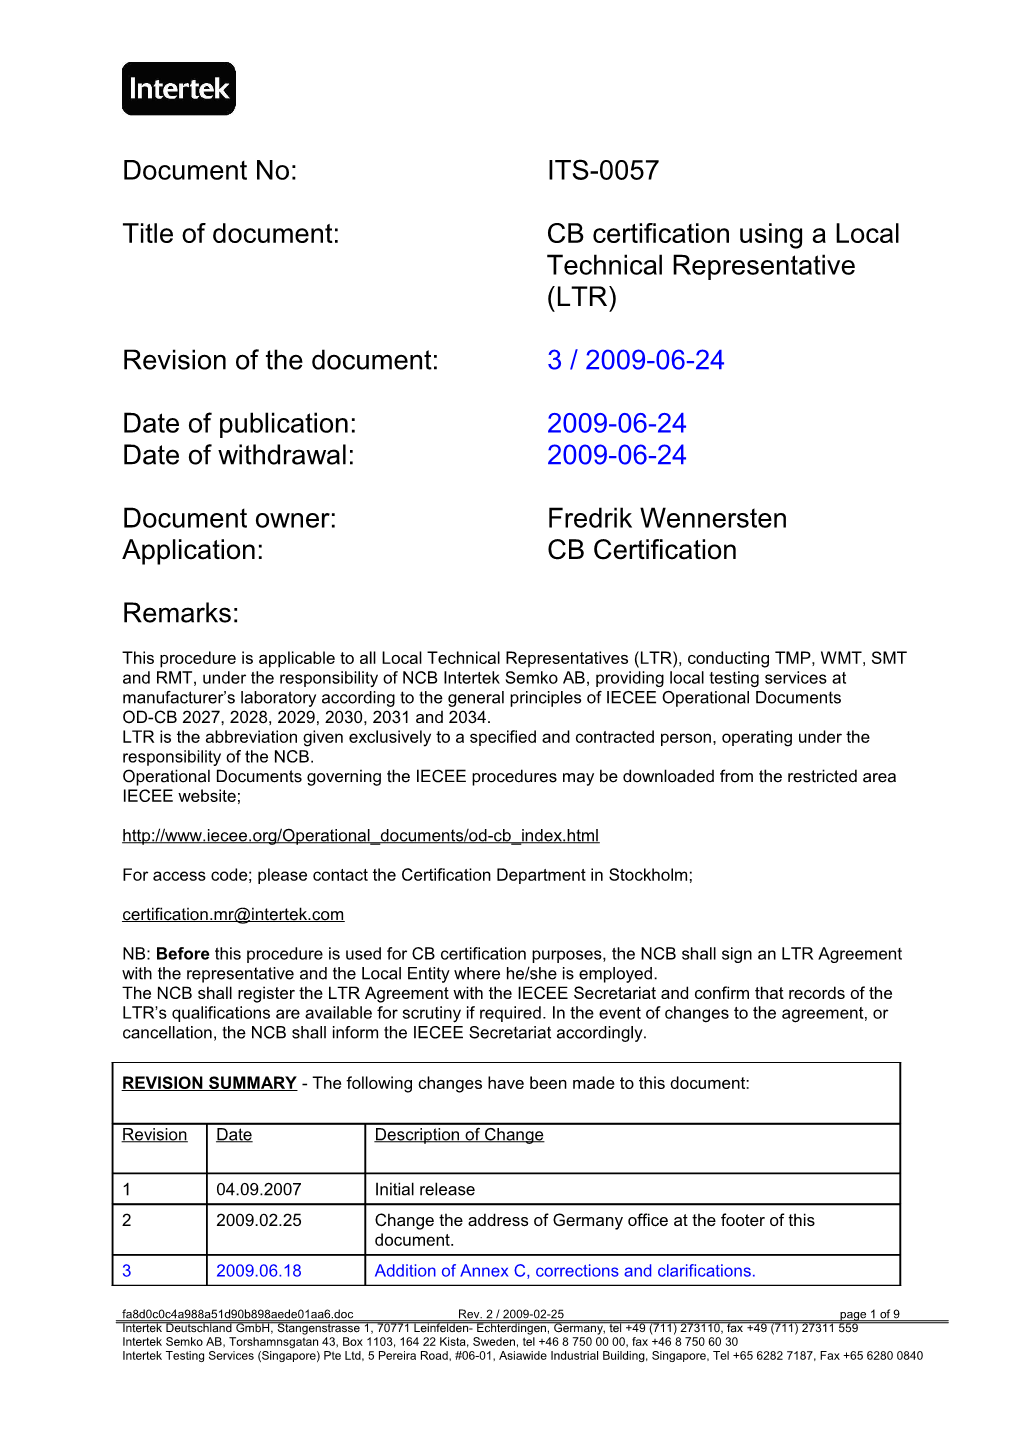 Title of Document: CB Certification Using a Local Technical Representative (LTR)